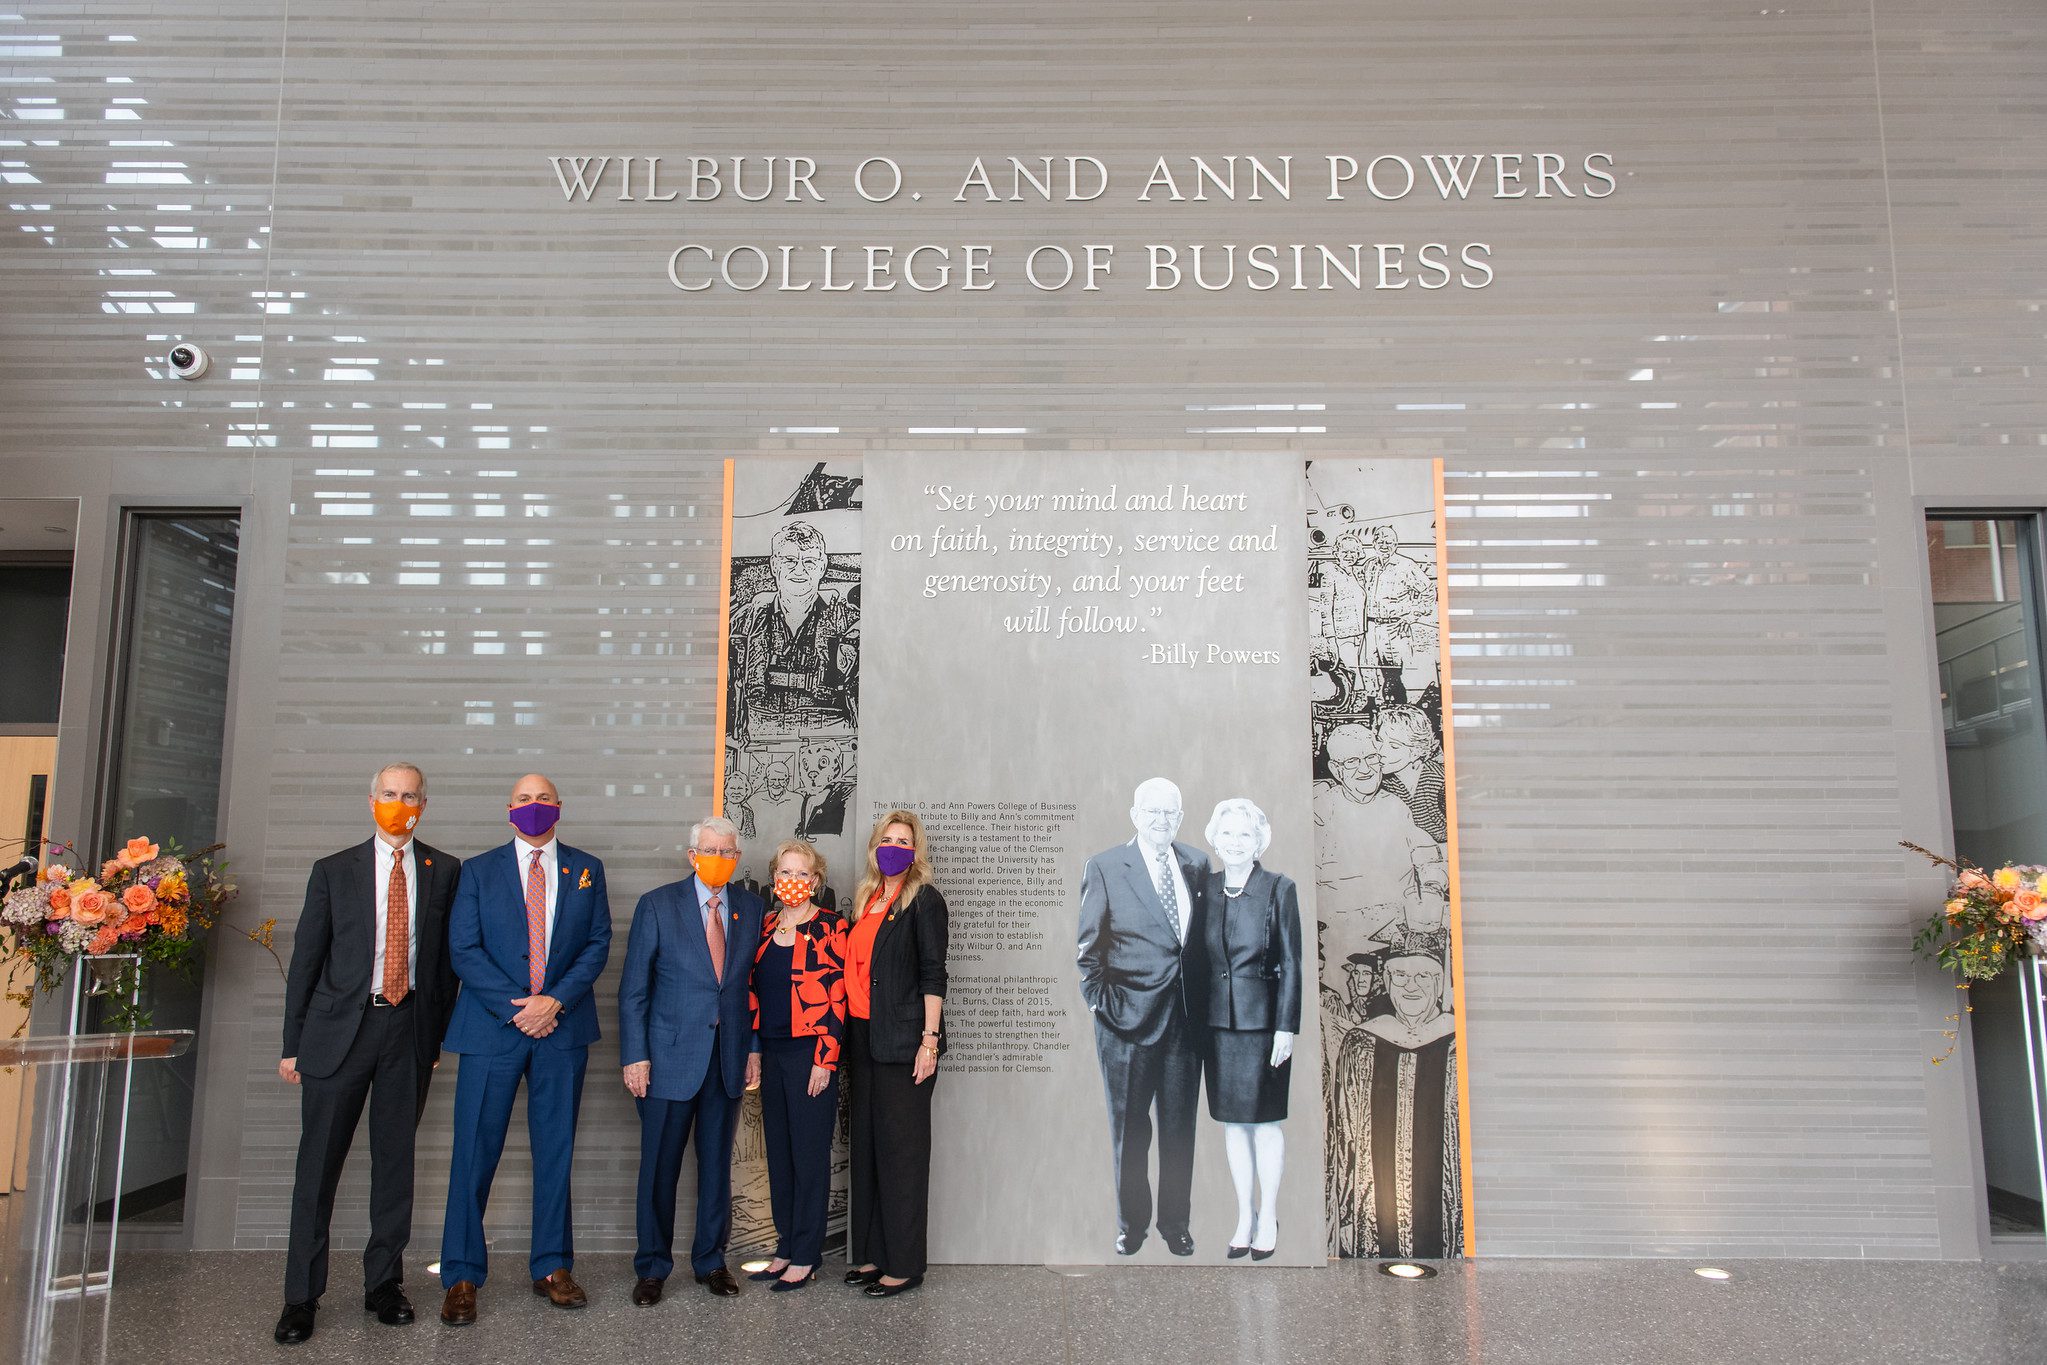 A group, including philanthropists Billy and Ann Powers, along with Dean York, is standing in front of a wall, inside a building, that features a quote and sketches of Billy and Ann Powers on its wall. Towering above the graphics is the name of the college, the Wilbur O. and Ann Powers College of Business, named to honor the philanthropic gift.